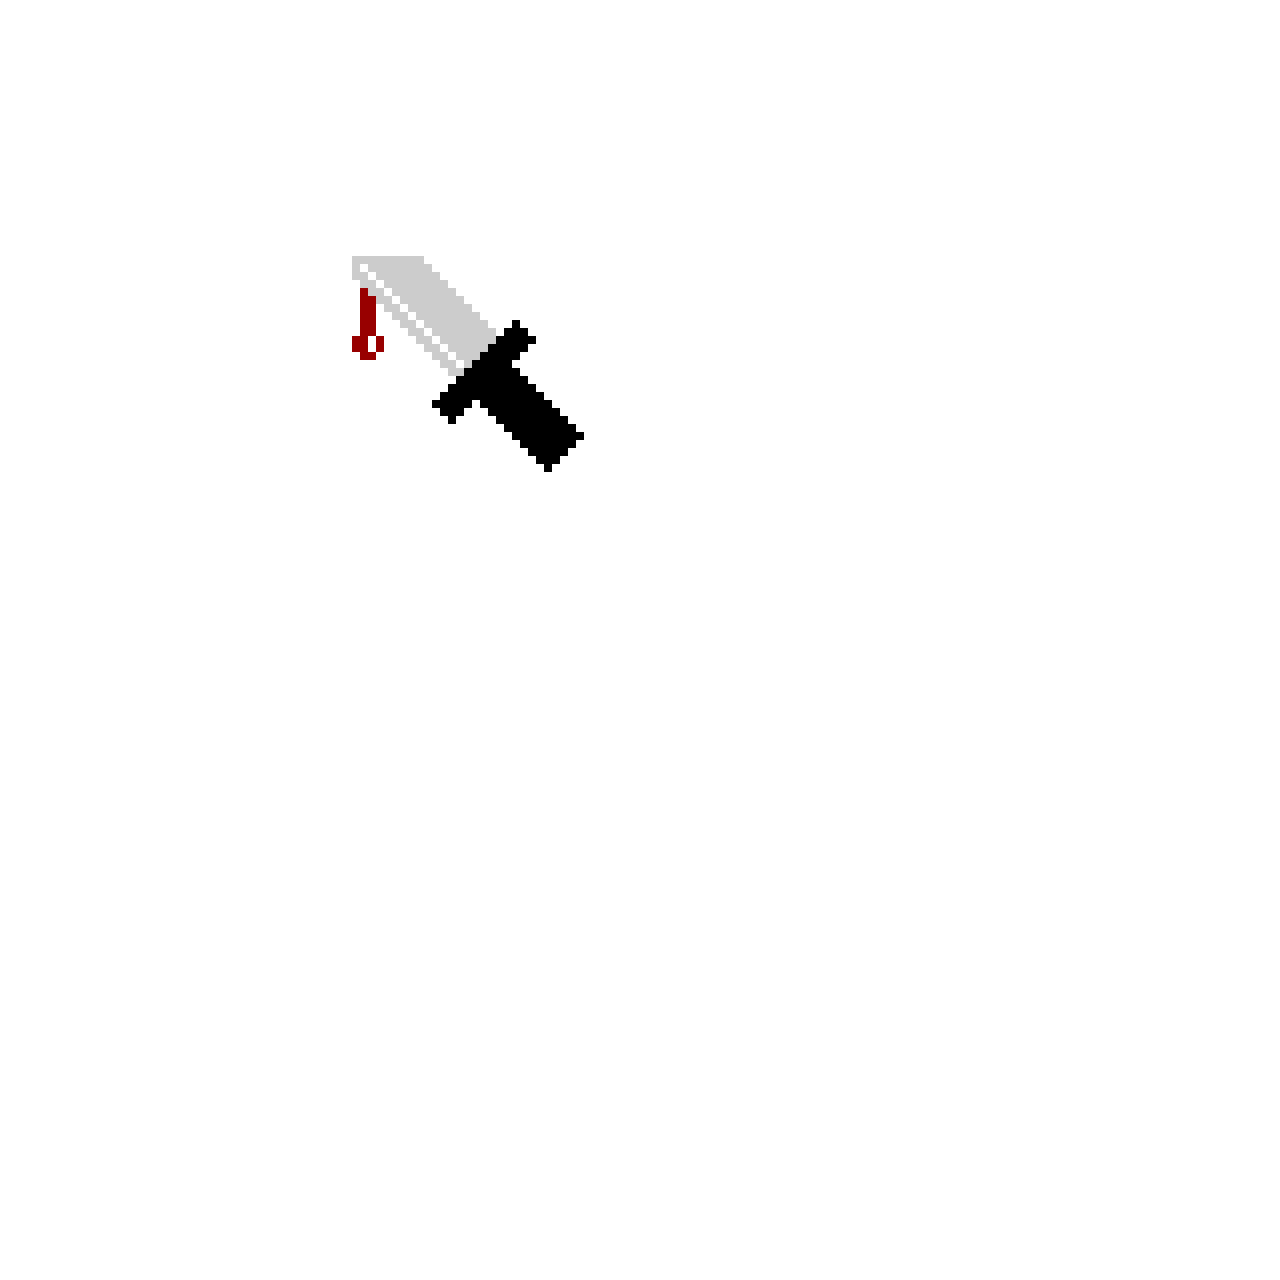 A Bloody Knife (OoOoO guess the reference vrsion!!1!